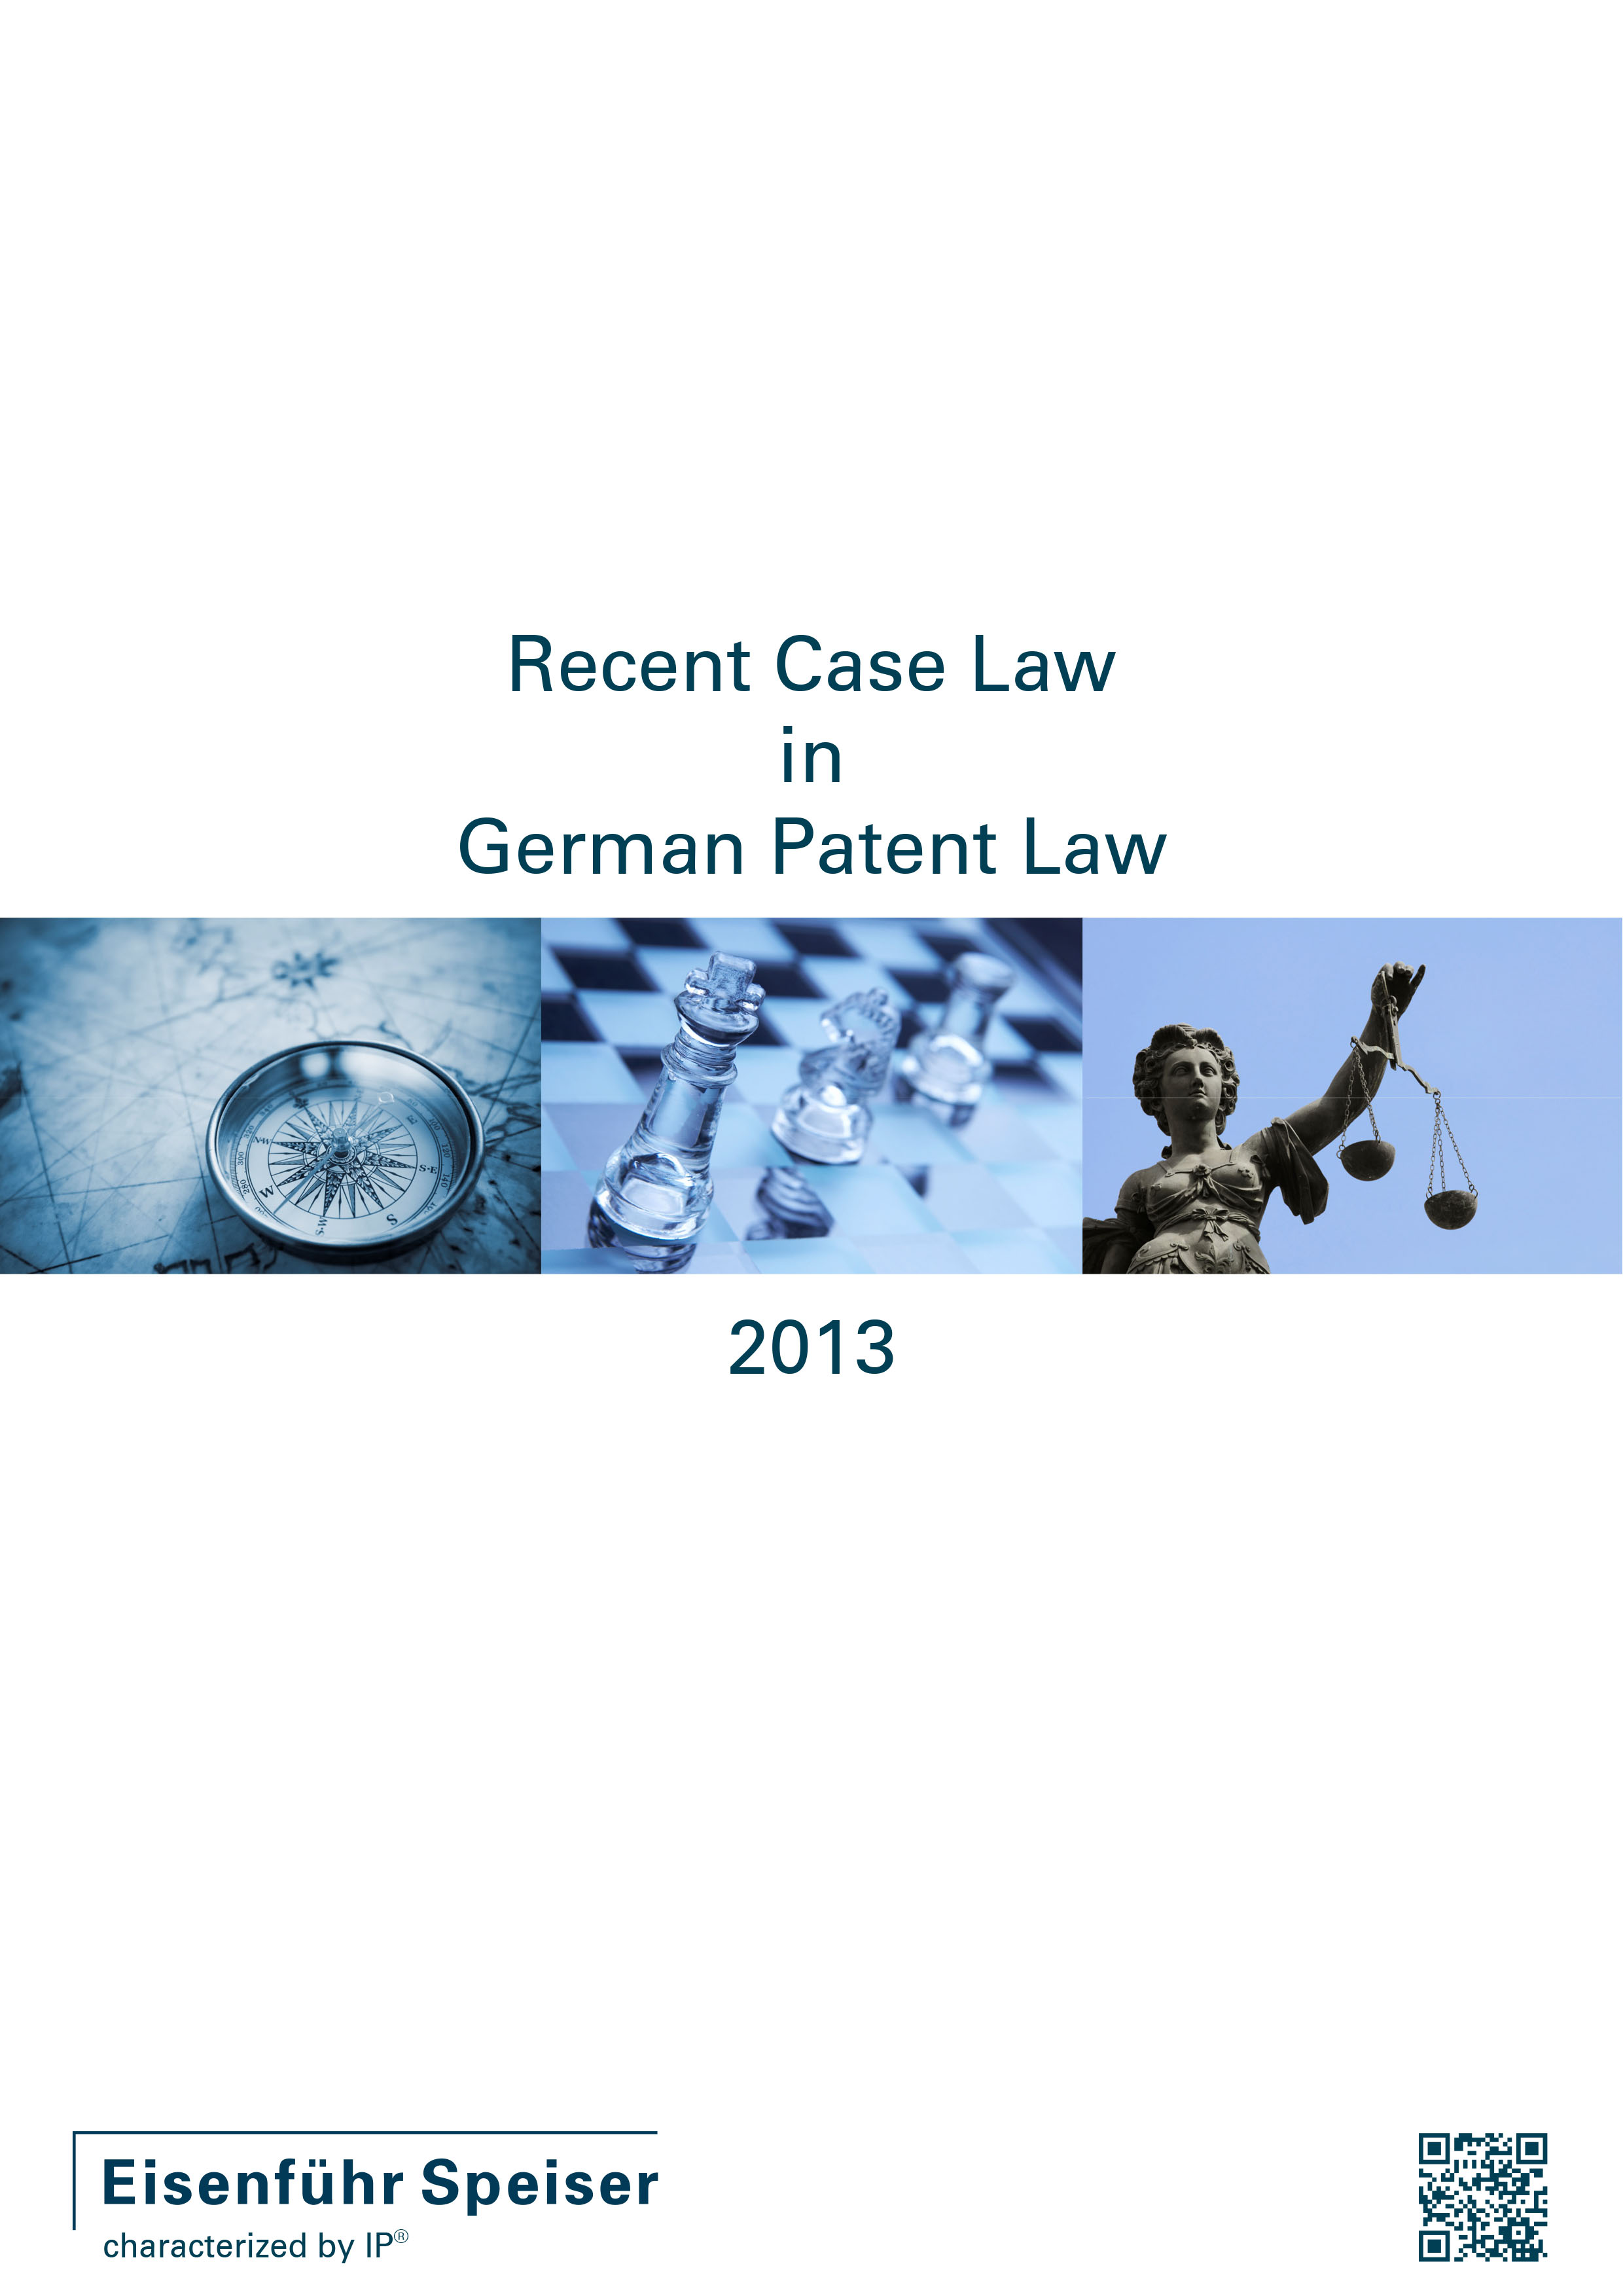 Recent Case Law in German Patent Law 2013